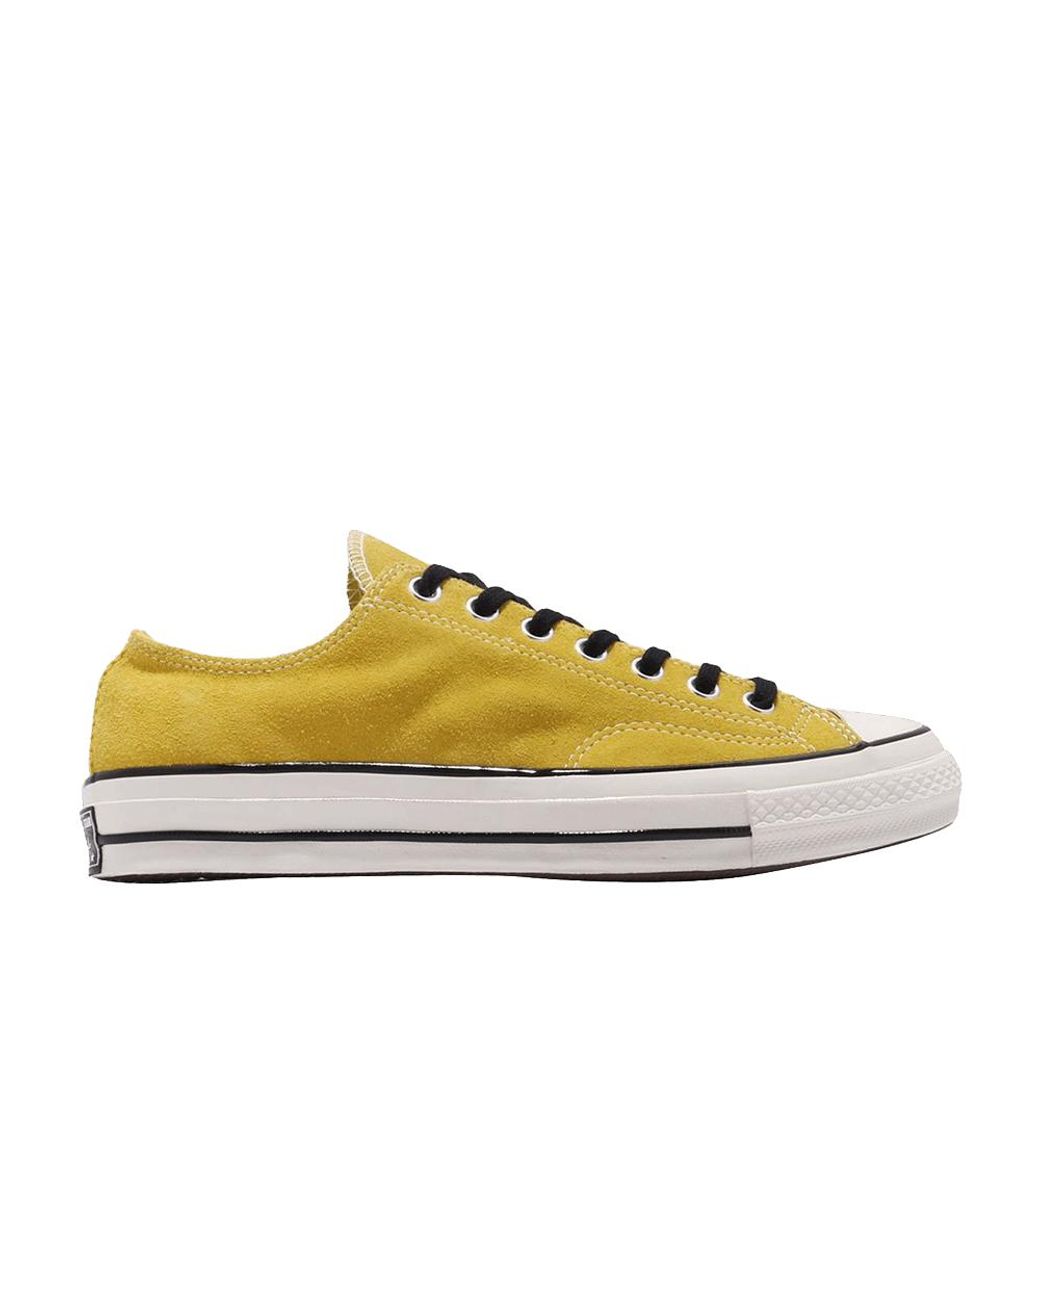 Converse Chuck 70 in Yellow for Men - Lyst